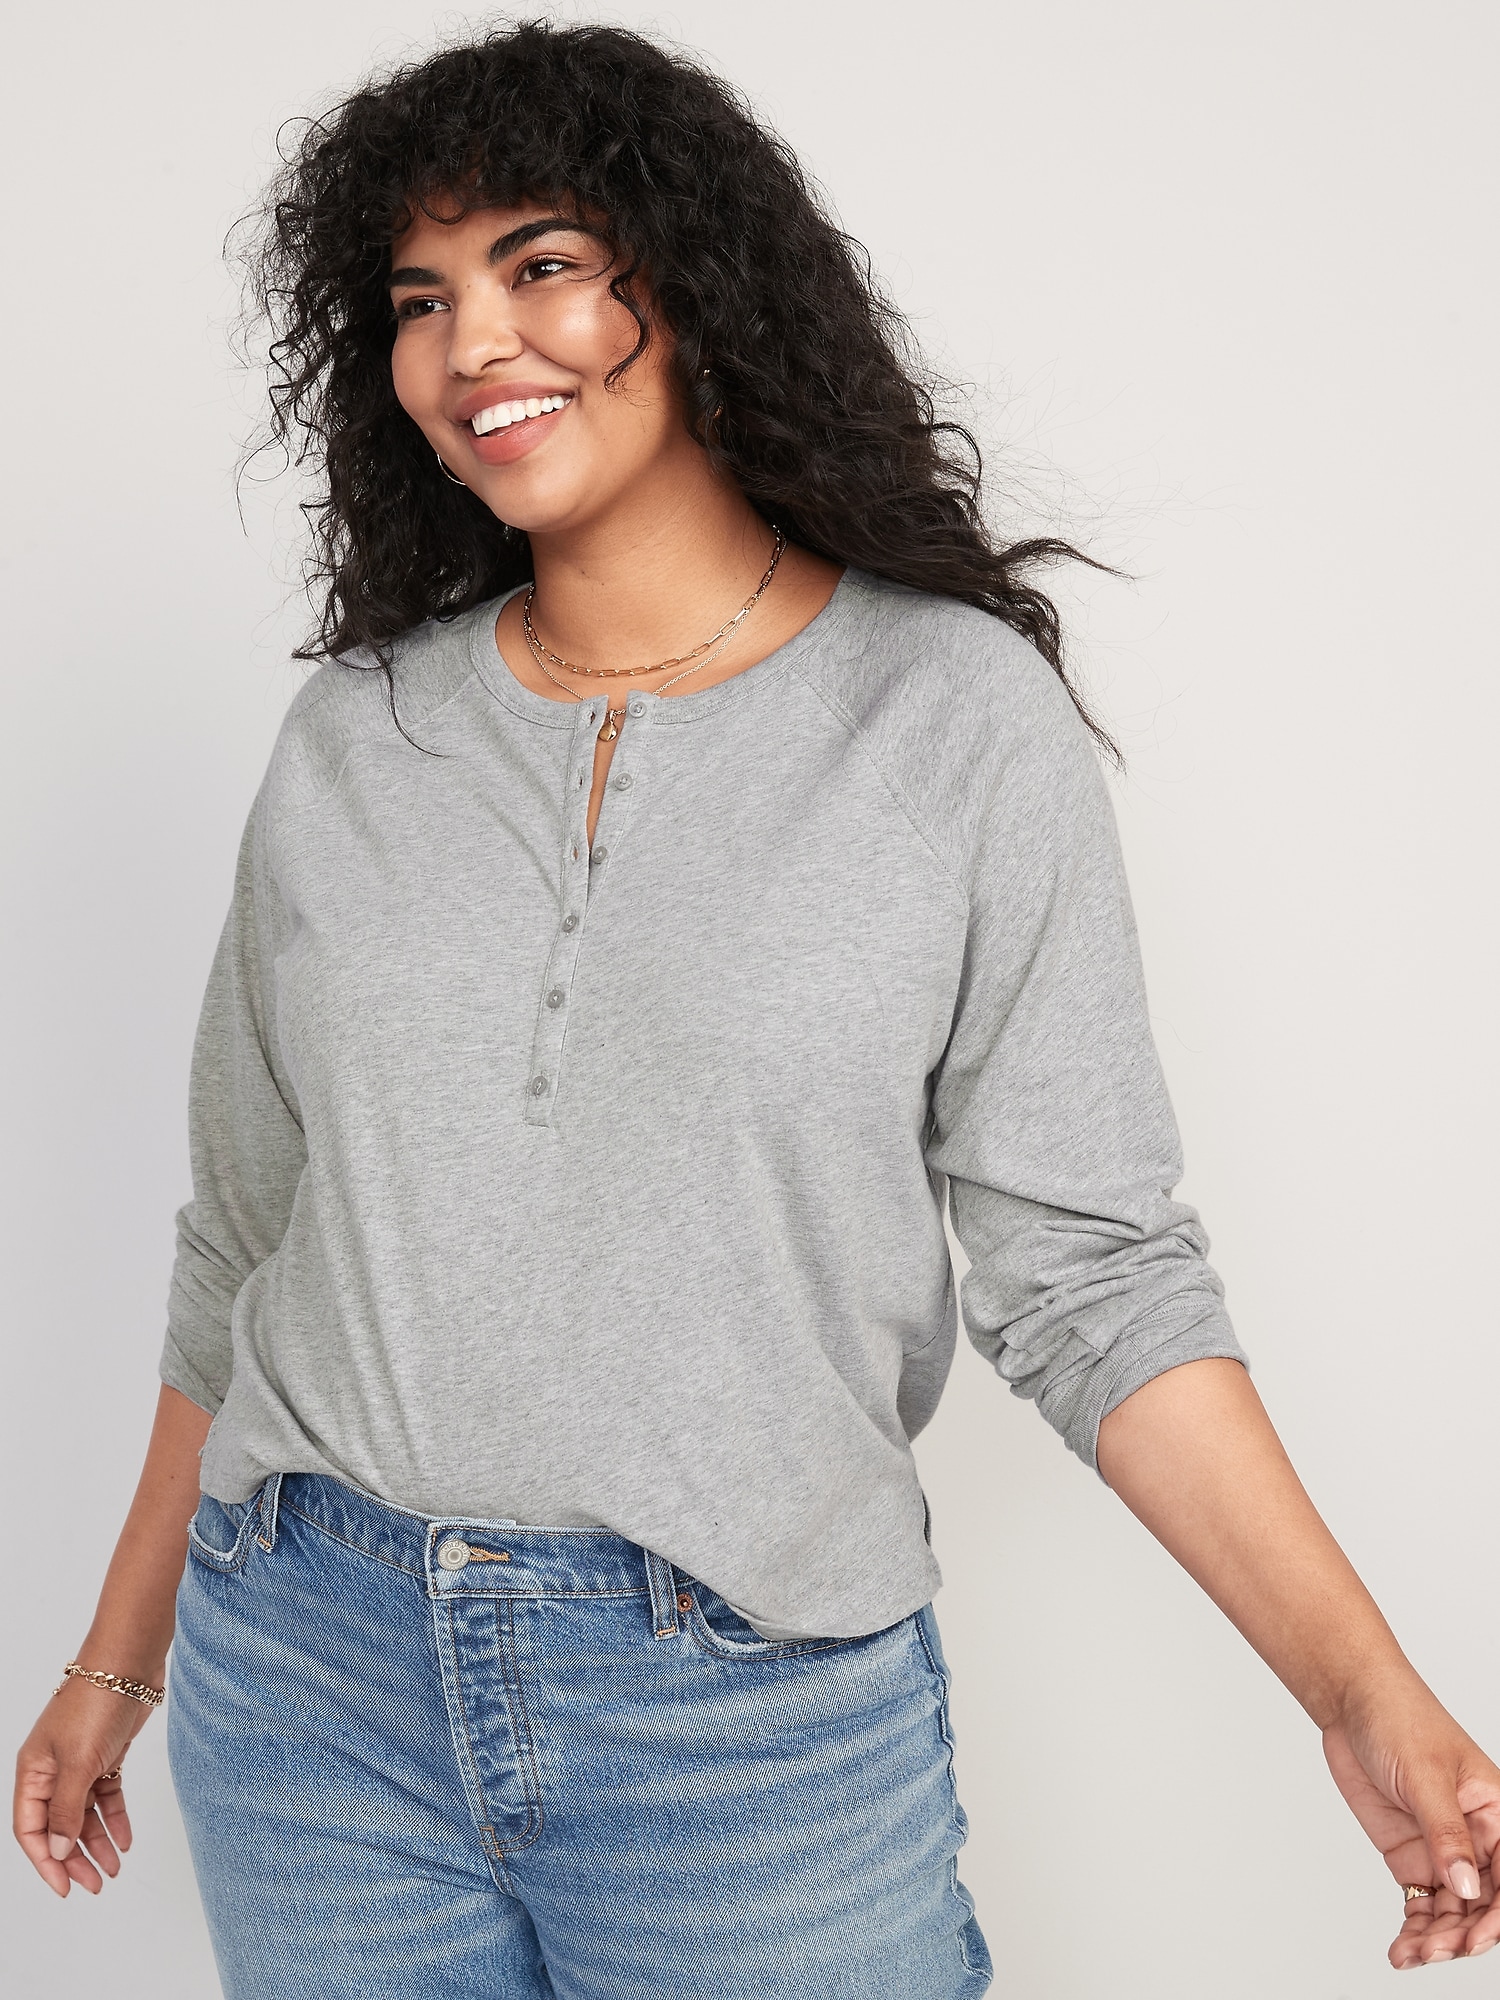 OLD NAVY Women's PLUS Size 4X Loose Garment-Dyed Long-Sleeve Henley T-Shirt